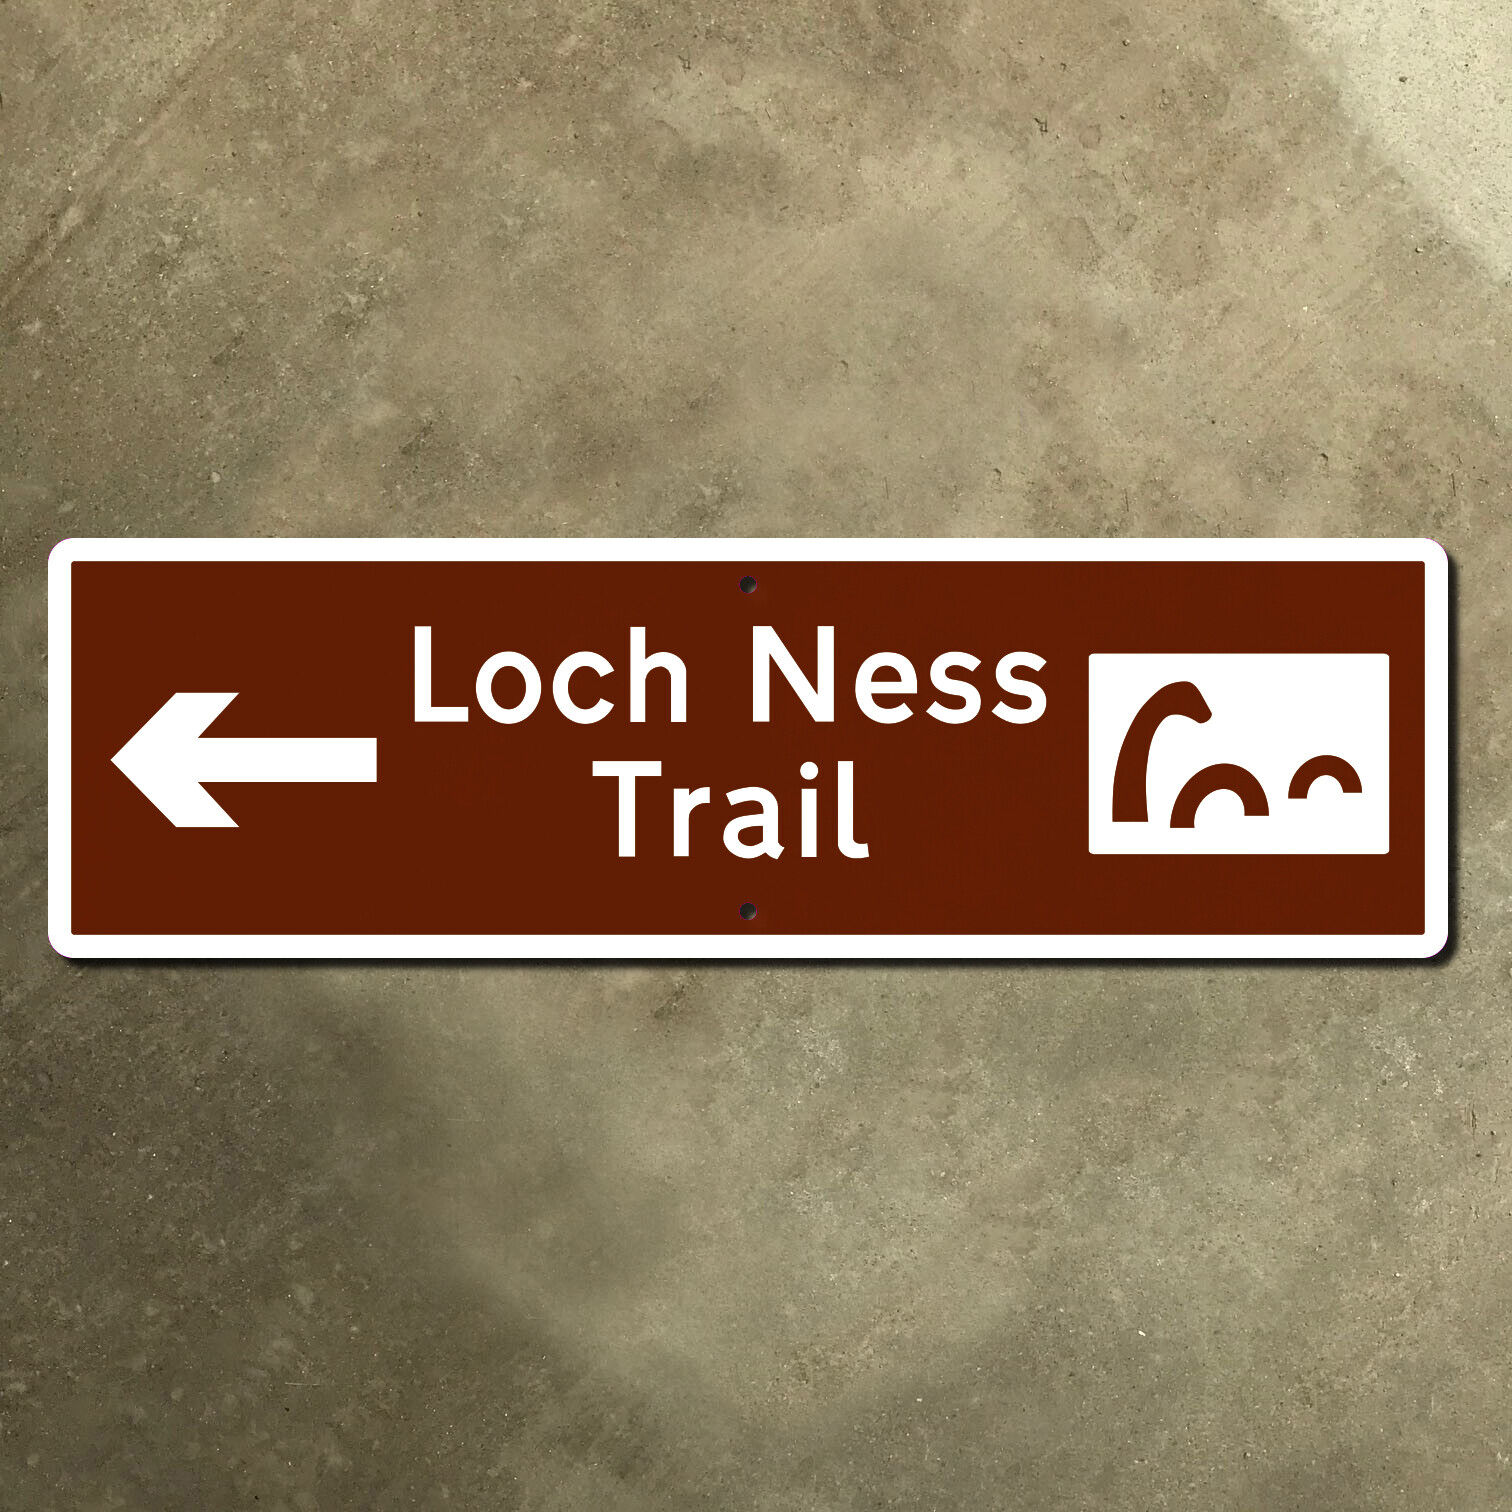 Scotland Loch Ness Trail Monster Nessie cryptid highway road guide sign 30x9